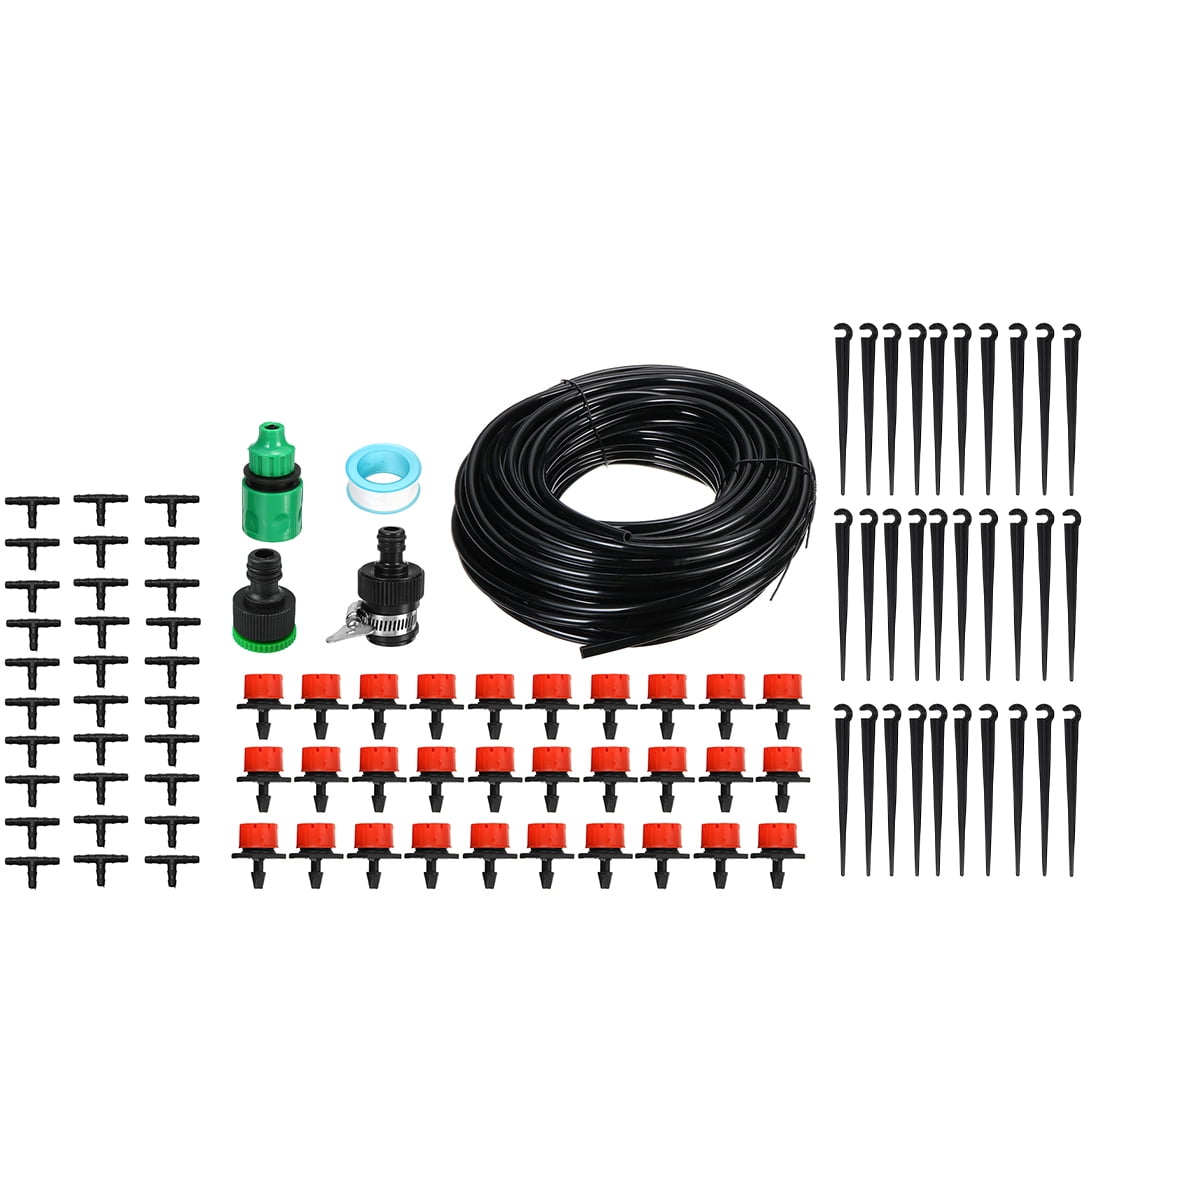 30M DIY Micro Drip Irrigation Kit System Hose Drippers Garden Plant Waterin D 